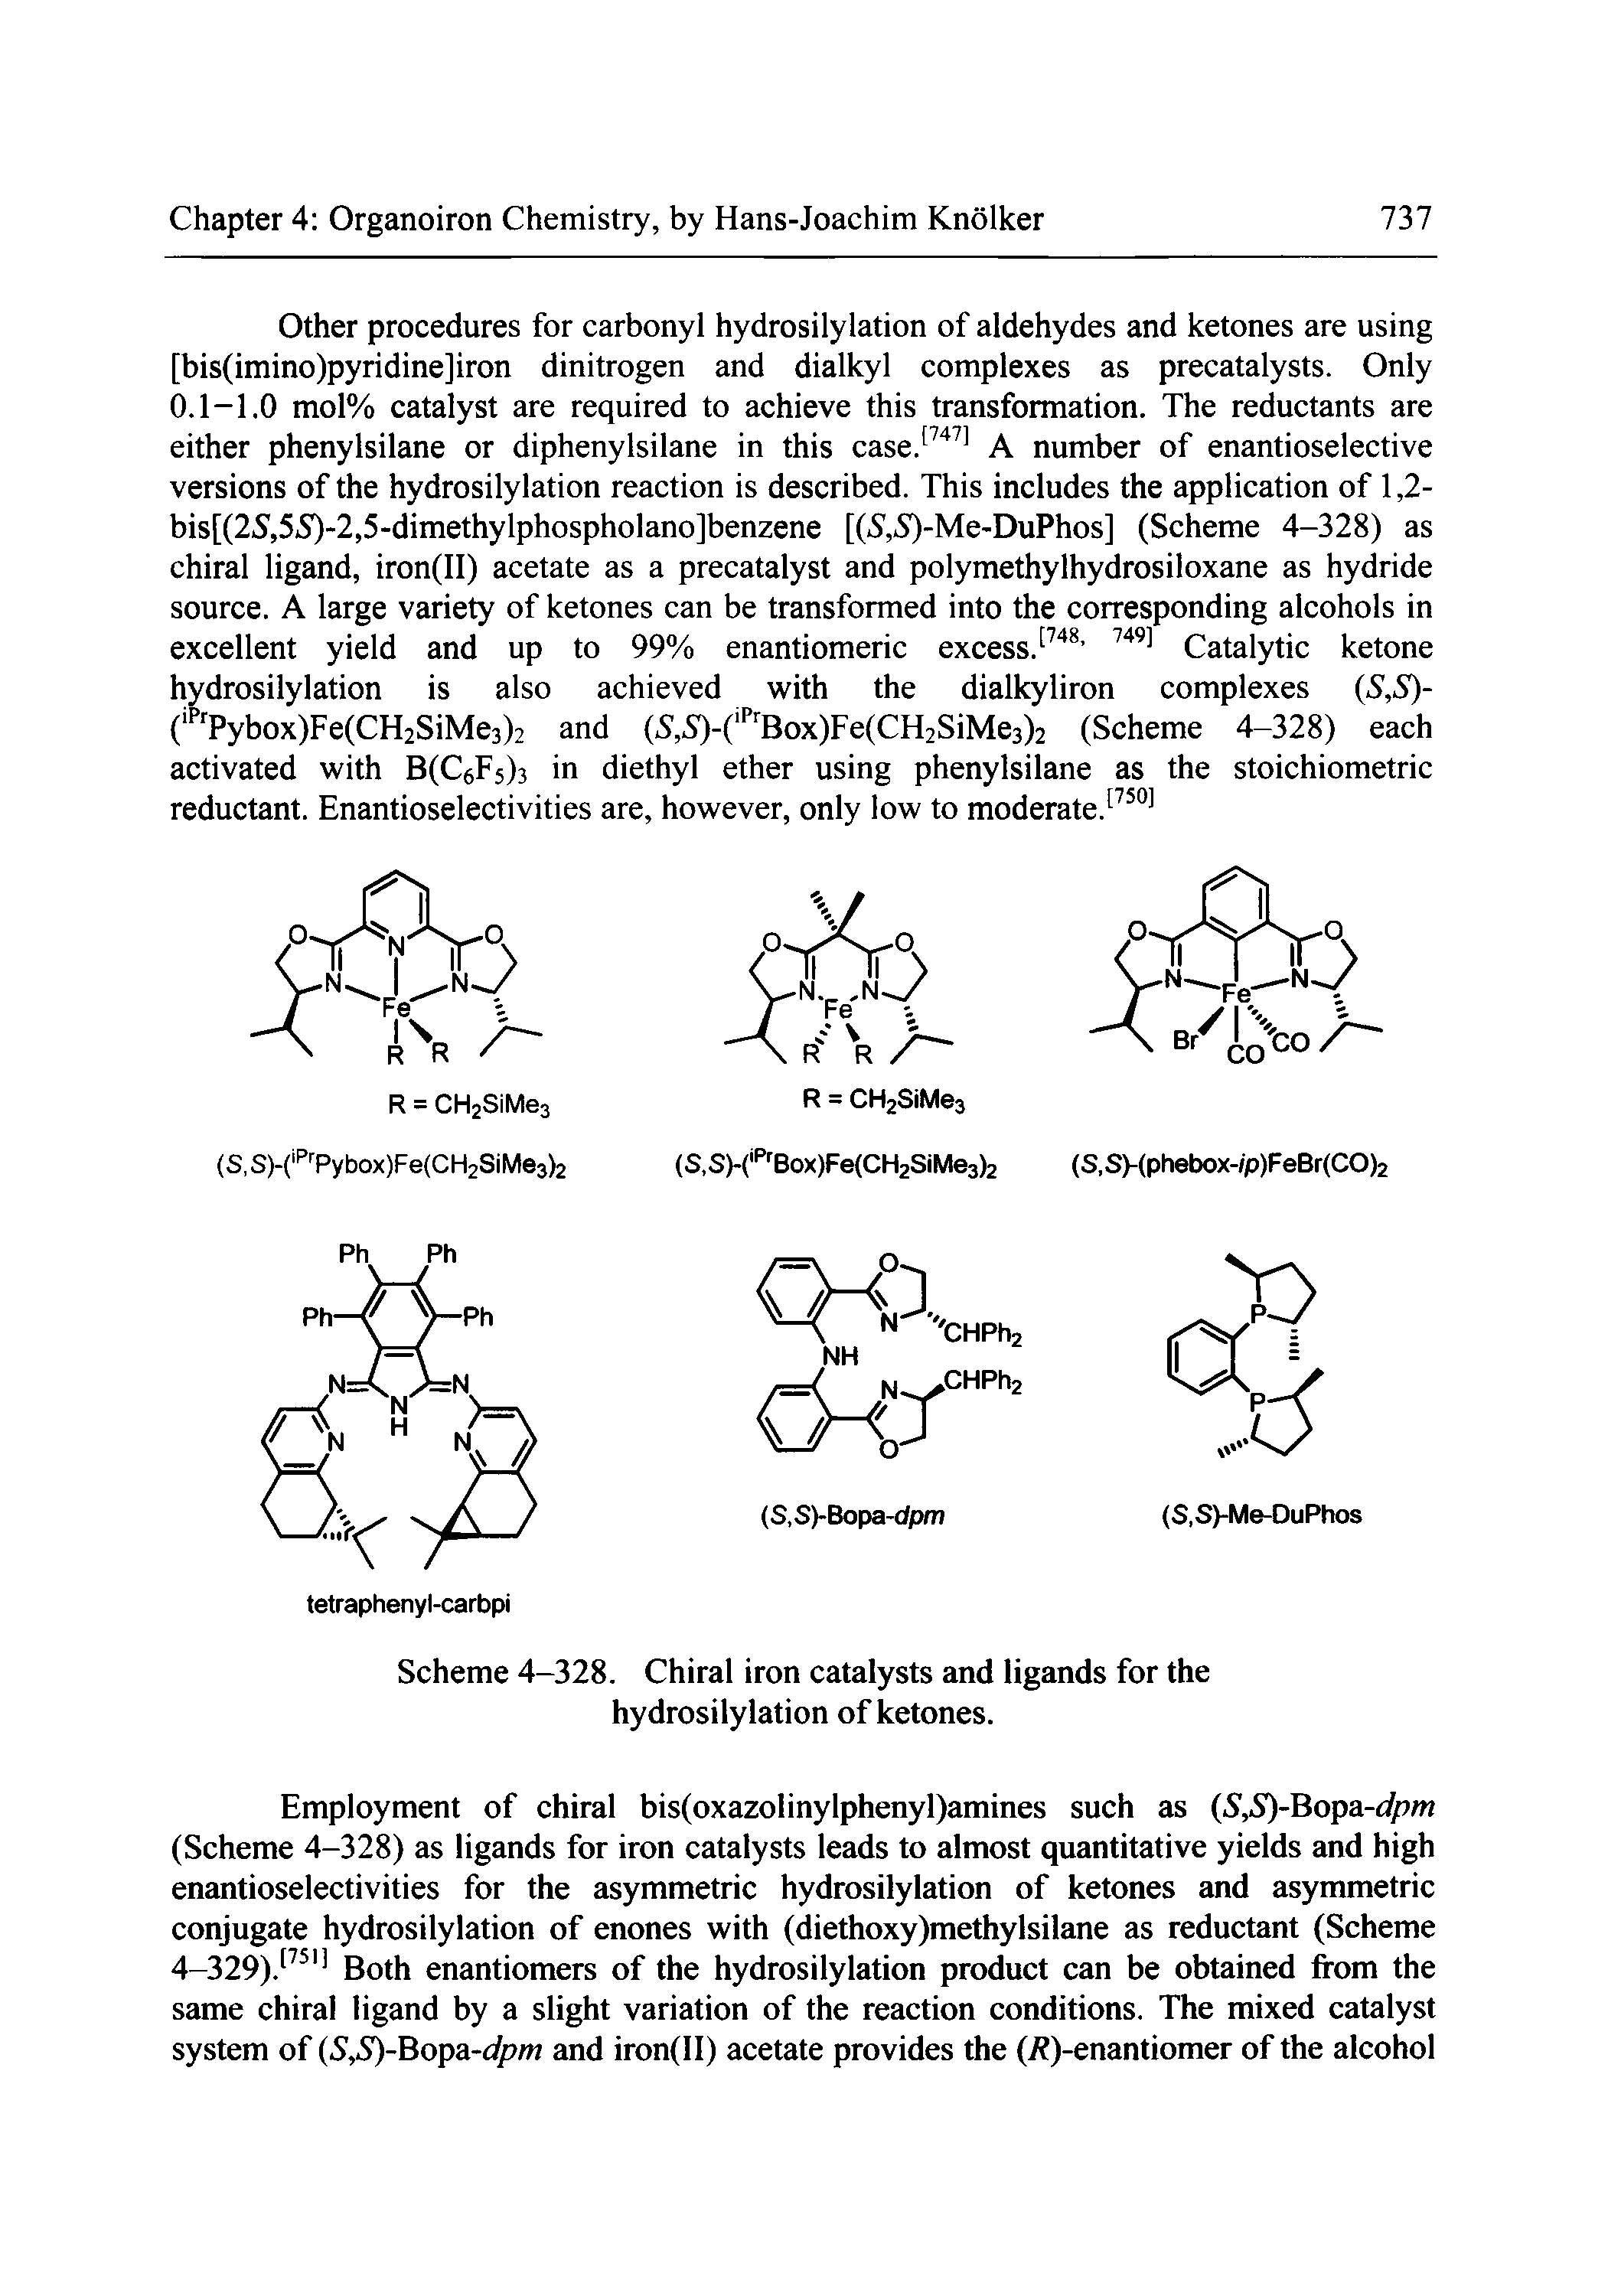 Scheme 4-328. Chiral iron catalysts and ligands for the hydrosilylation of ketones.